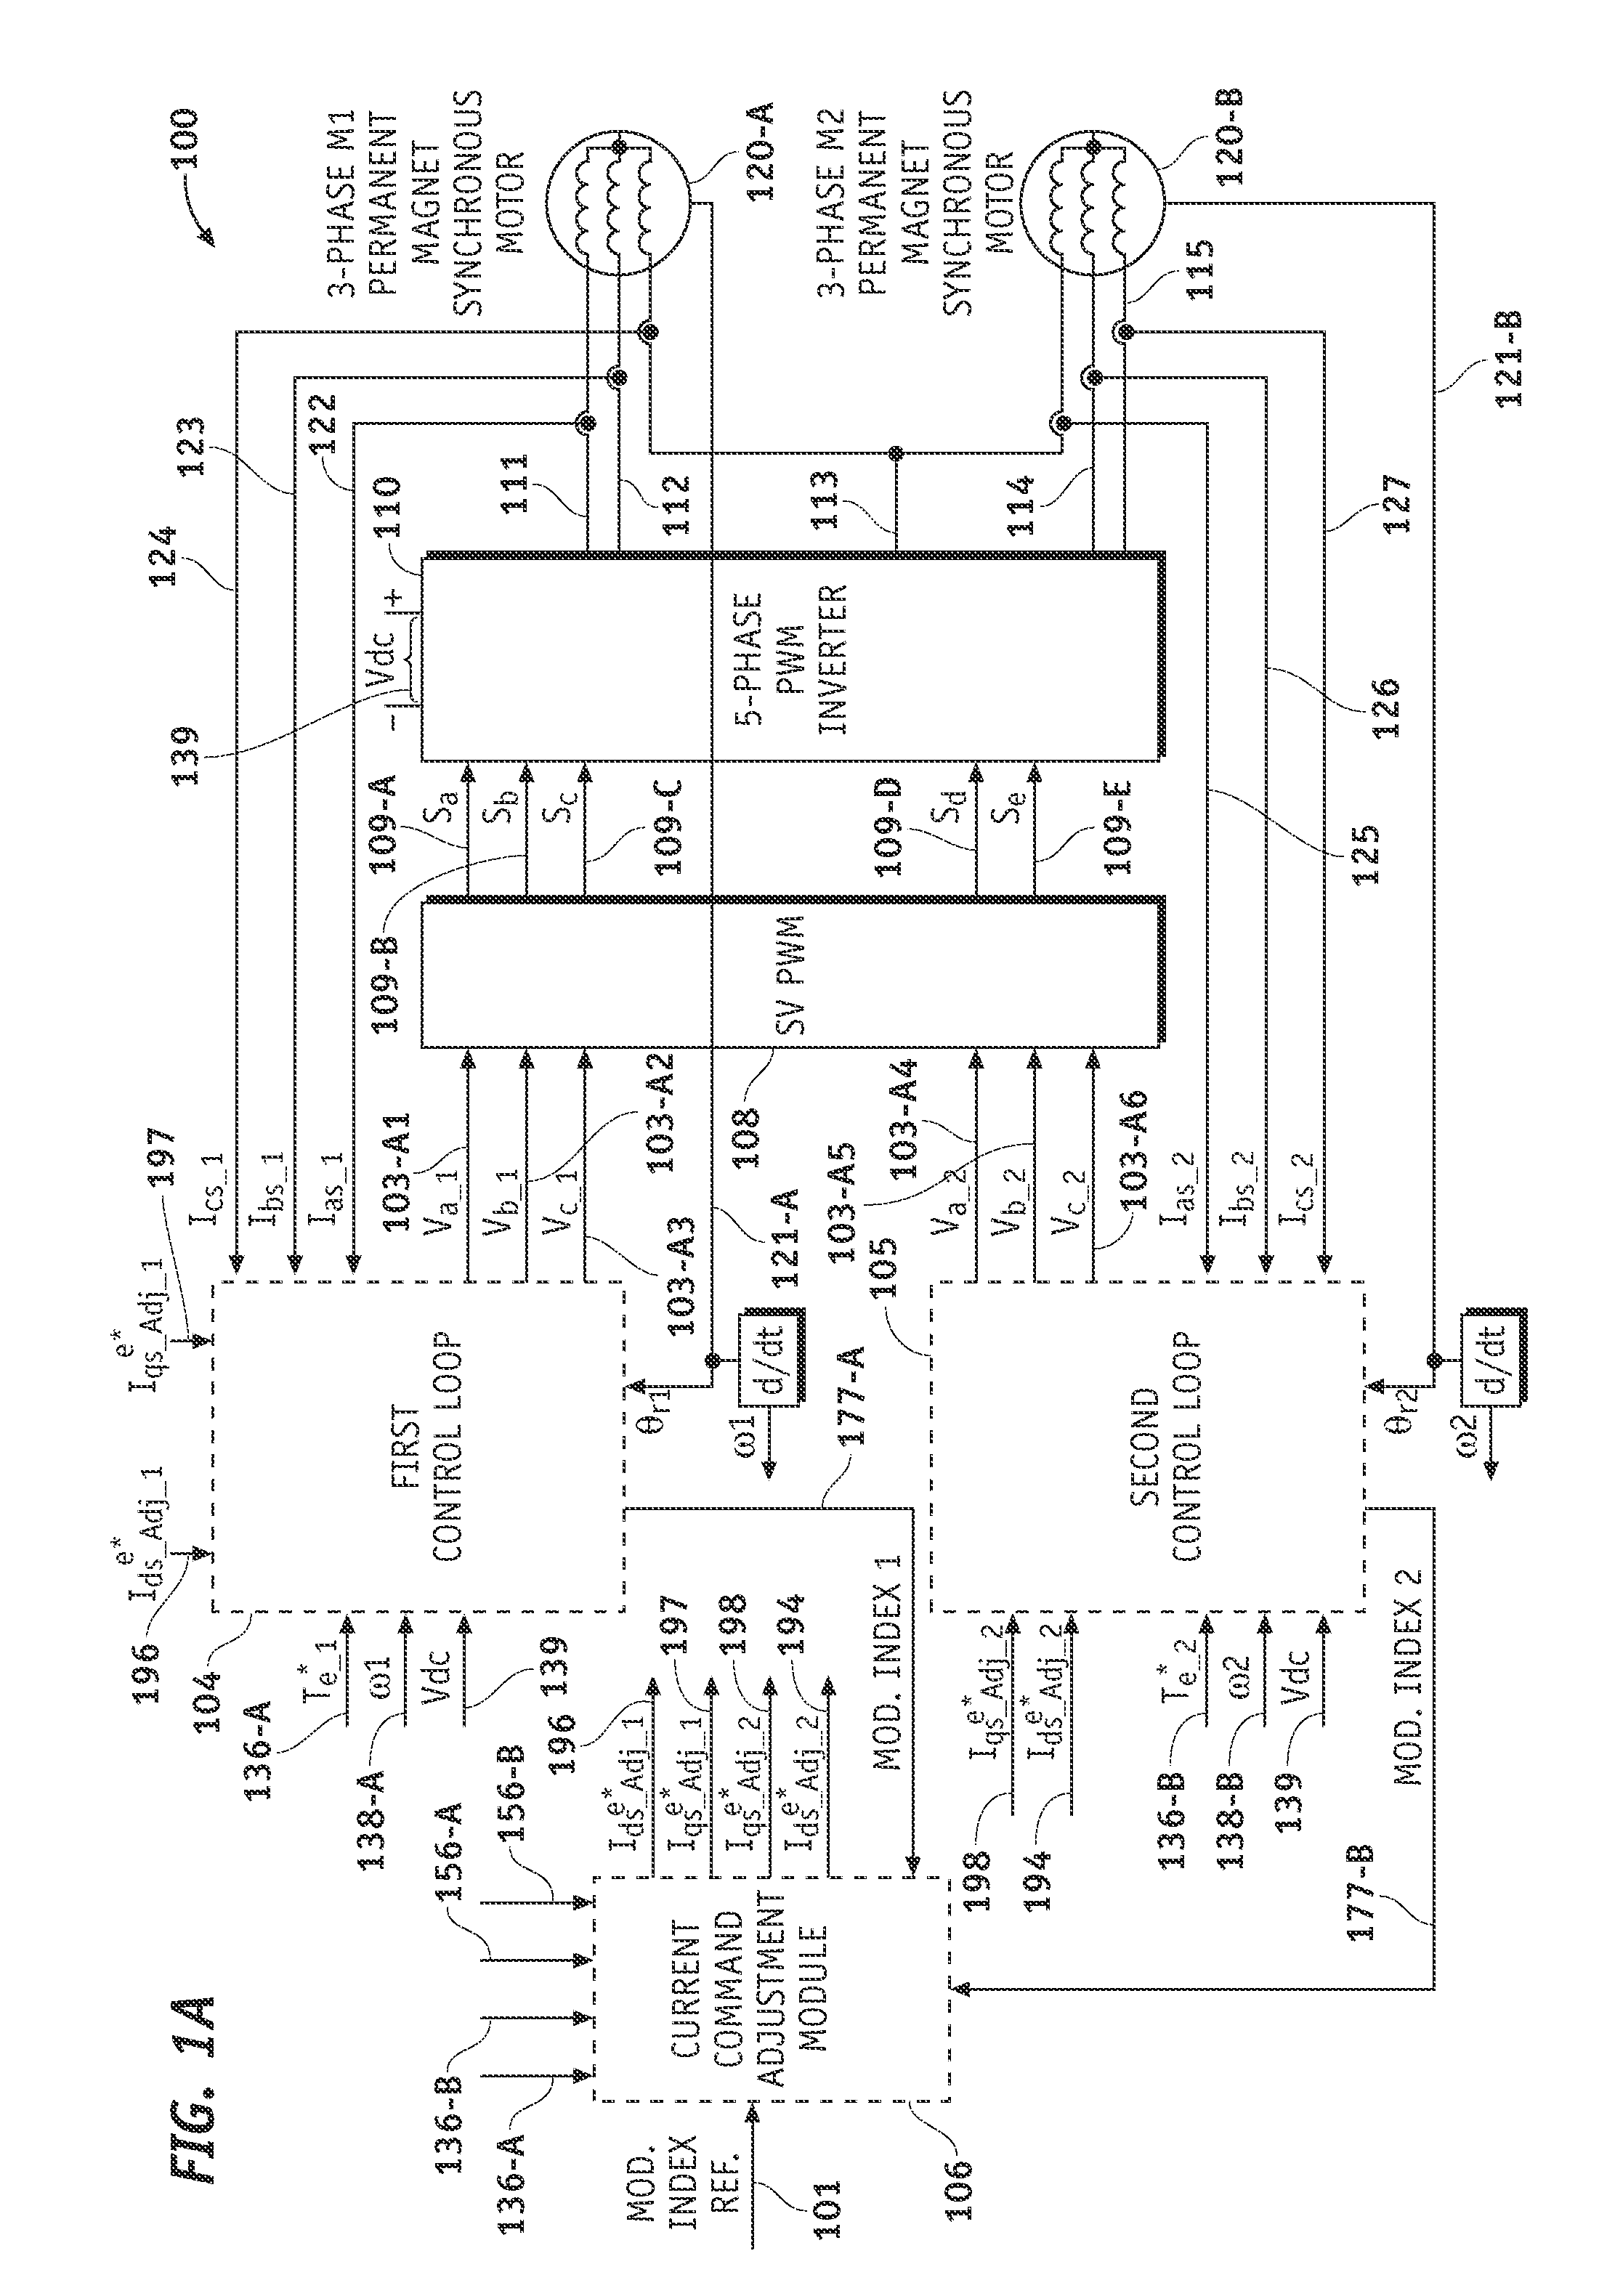 Methods, systems and apparatus for controlling operation of two alternating current (AC) machines